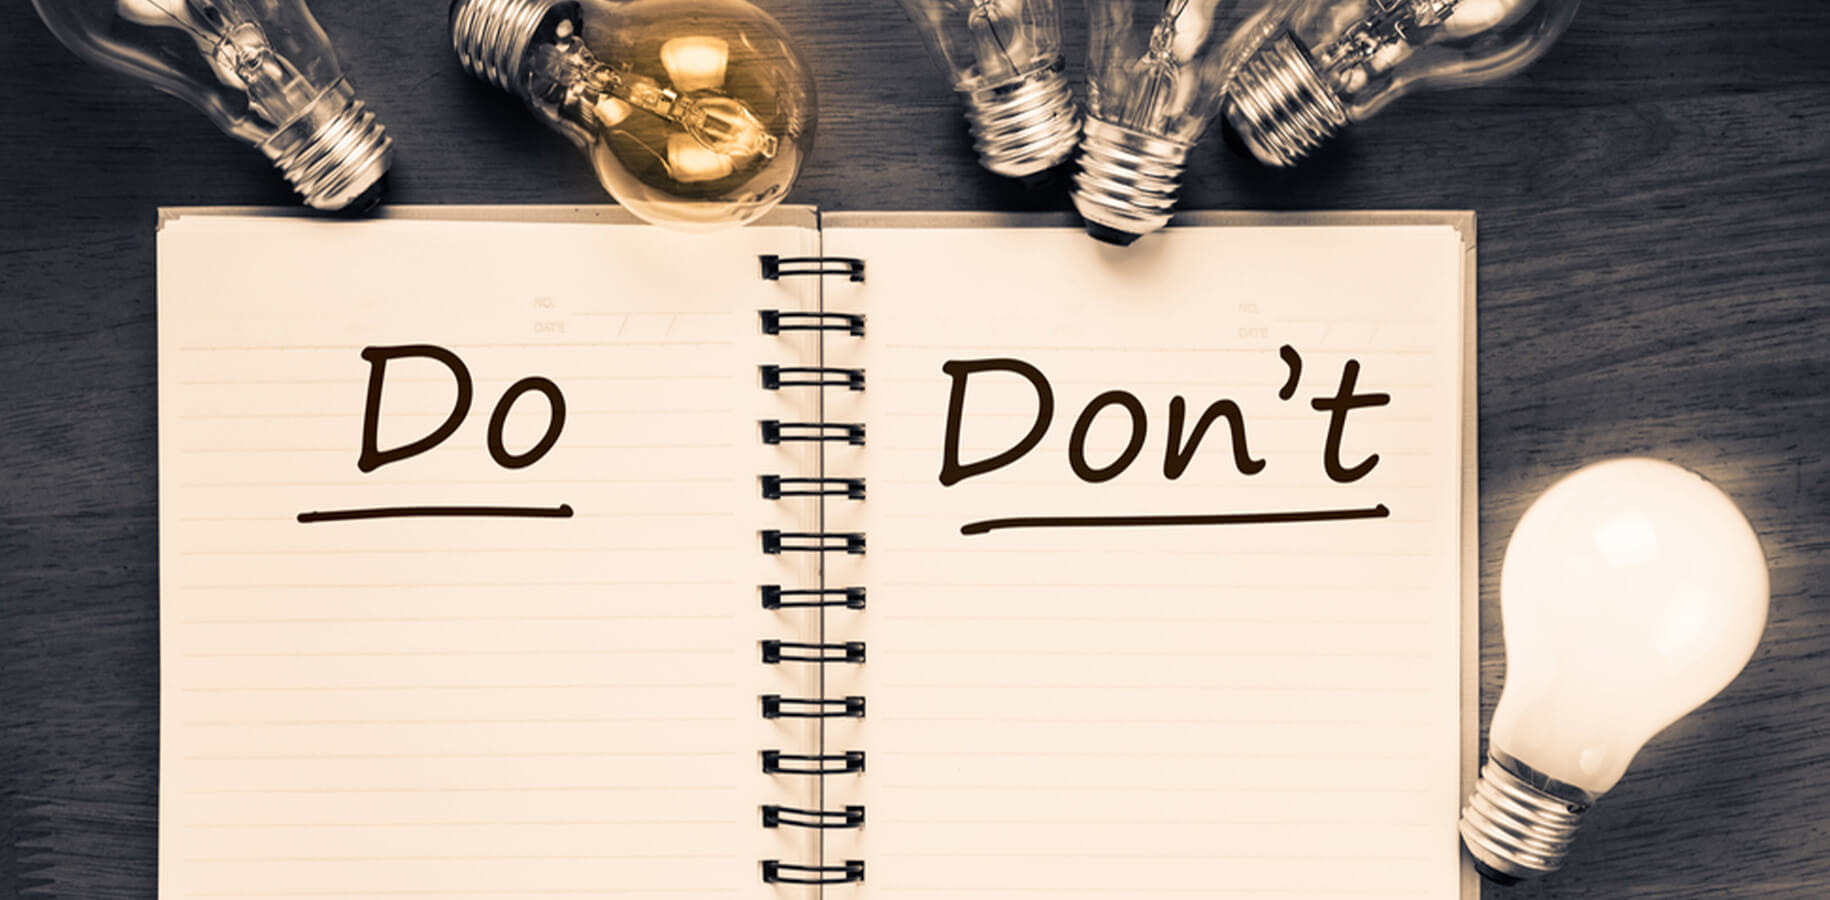 A+ Content: the Dos and Don’ts